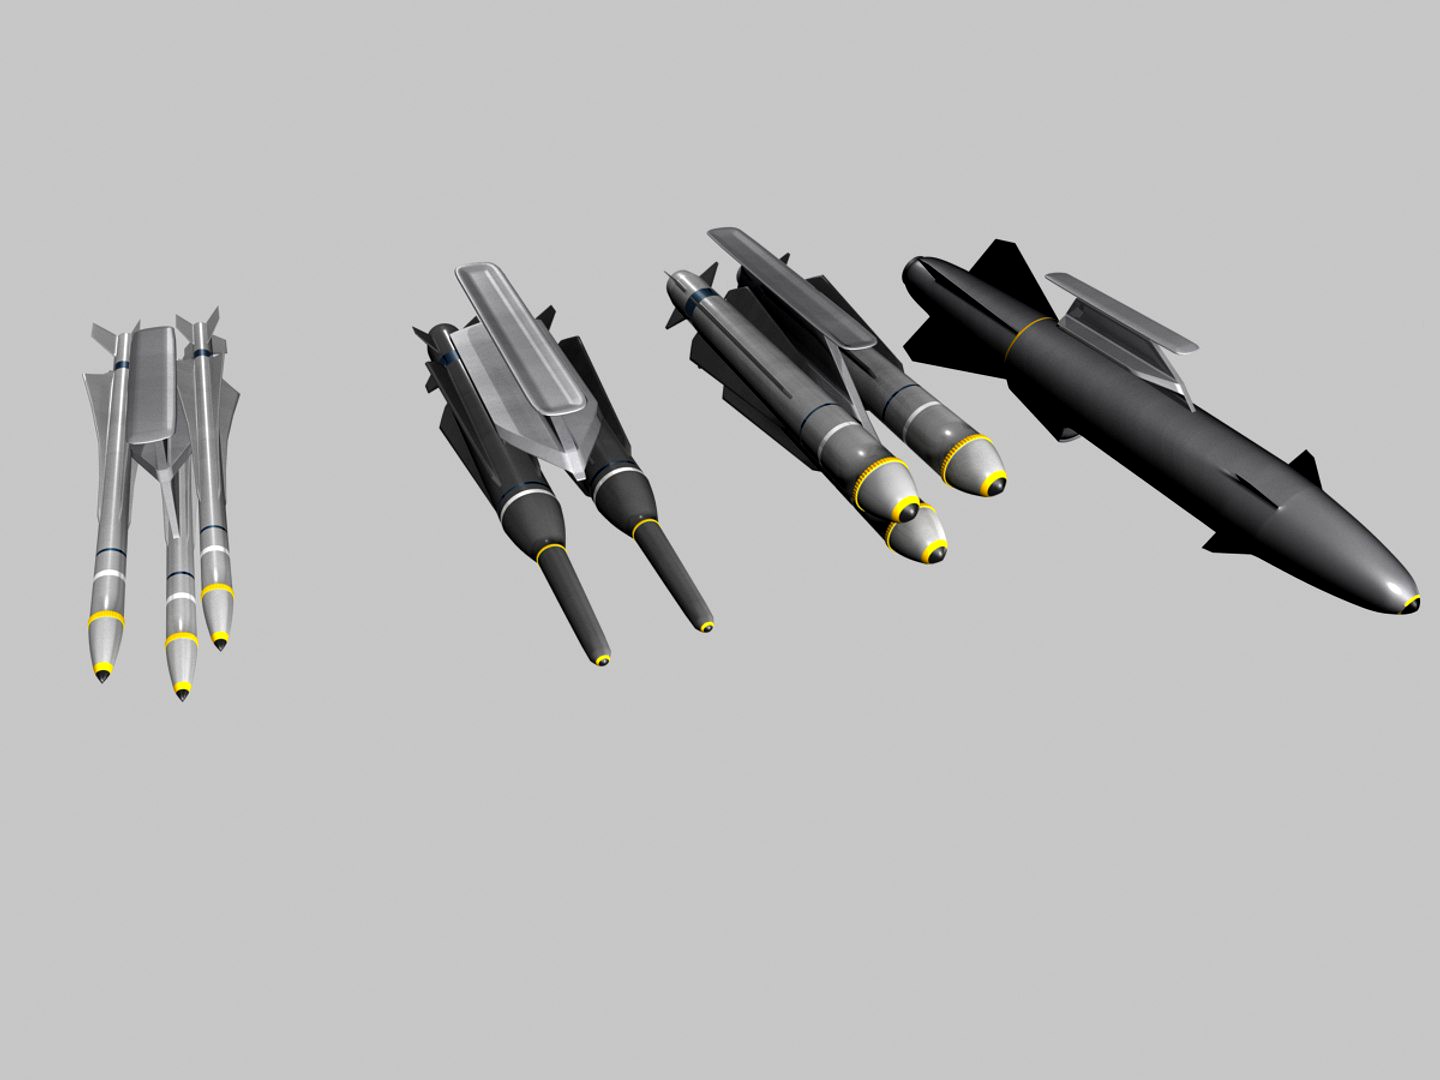 Airfighter Weapons